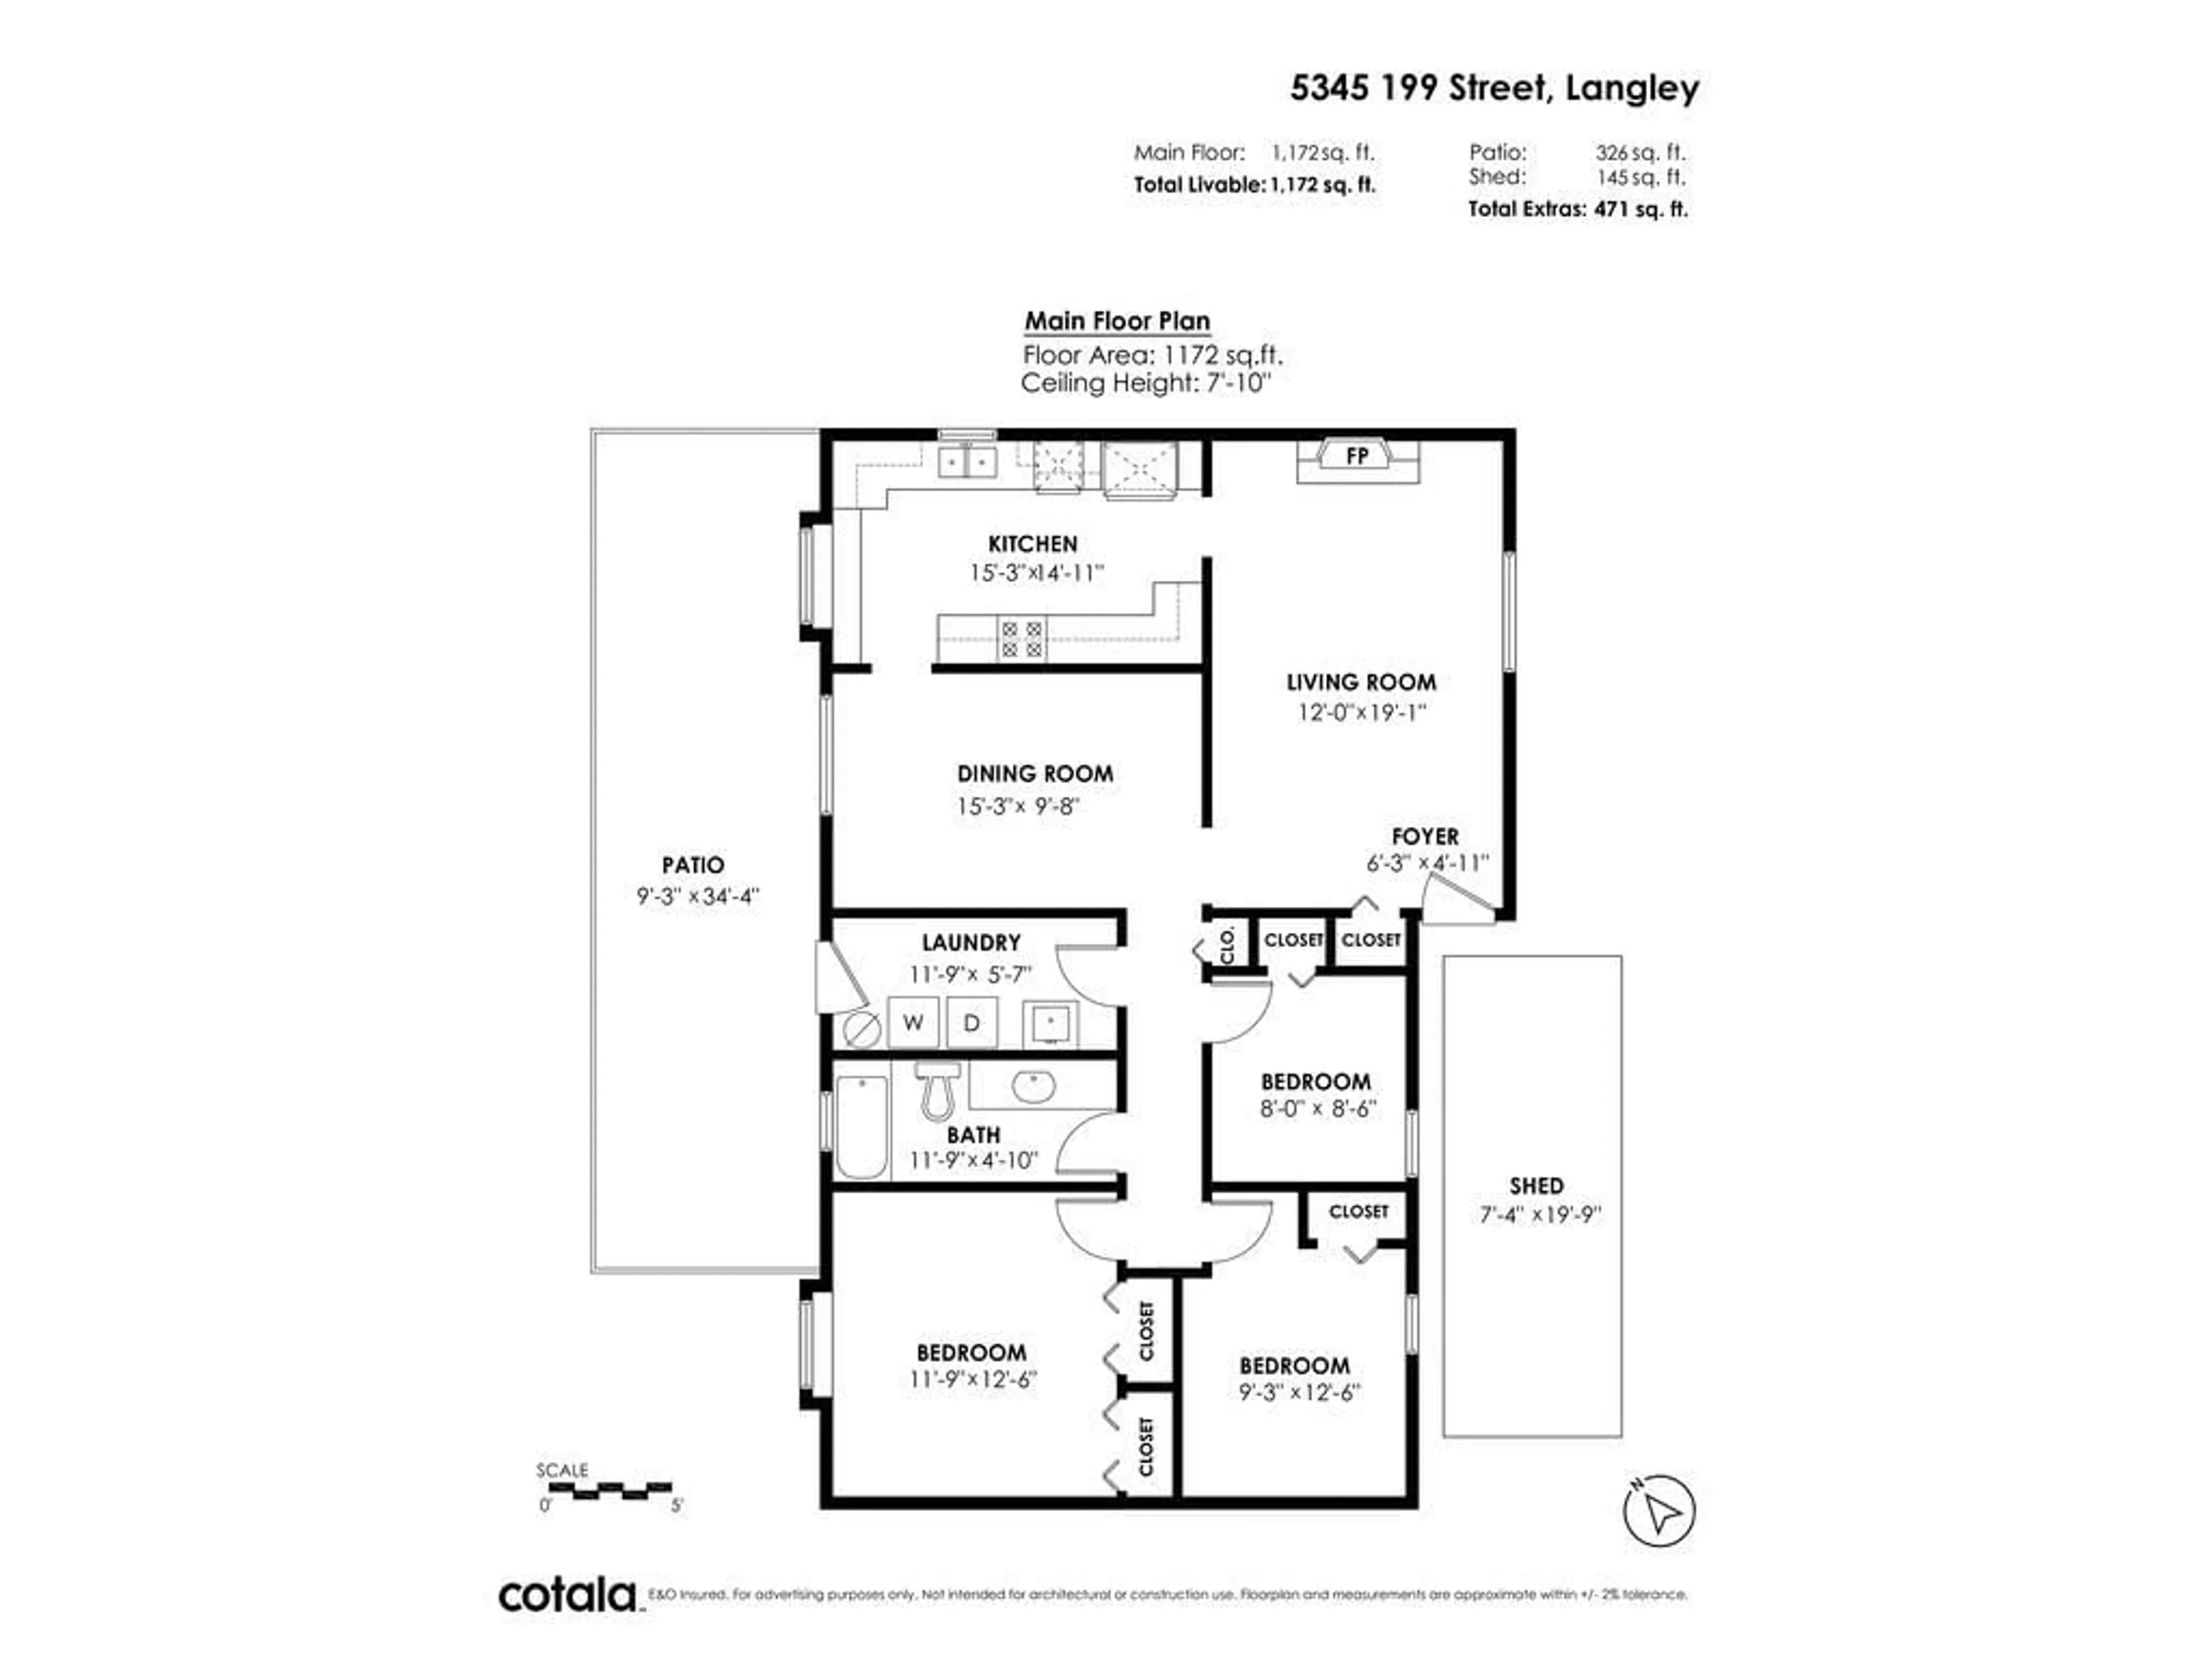 Floor plan for 5345 199 STREET, Langley British Columbia V3A6T8